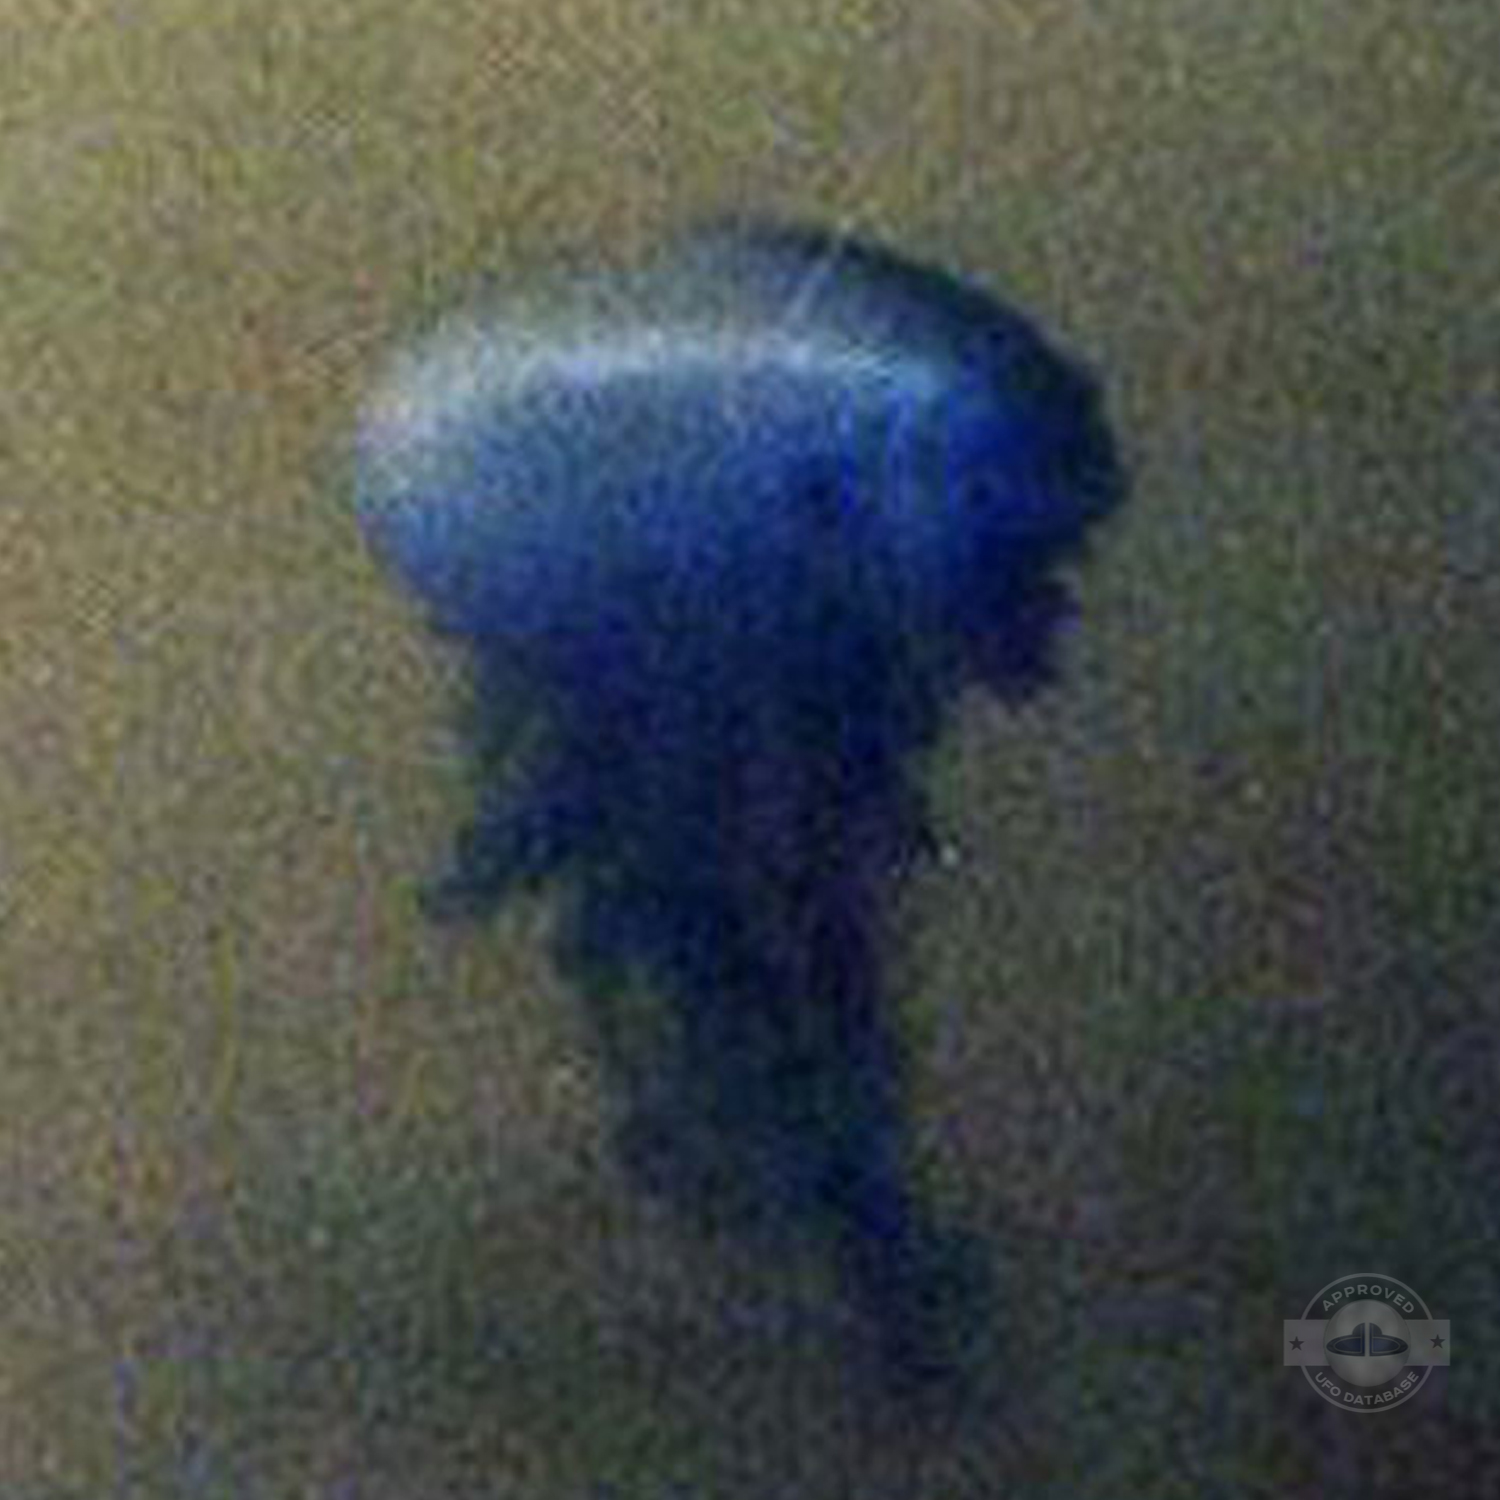 Best UFO picture showing UFO in Cloud disguise | Viborg, Denmark 1974 UFO Picture #222-4